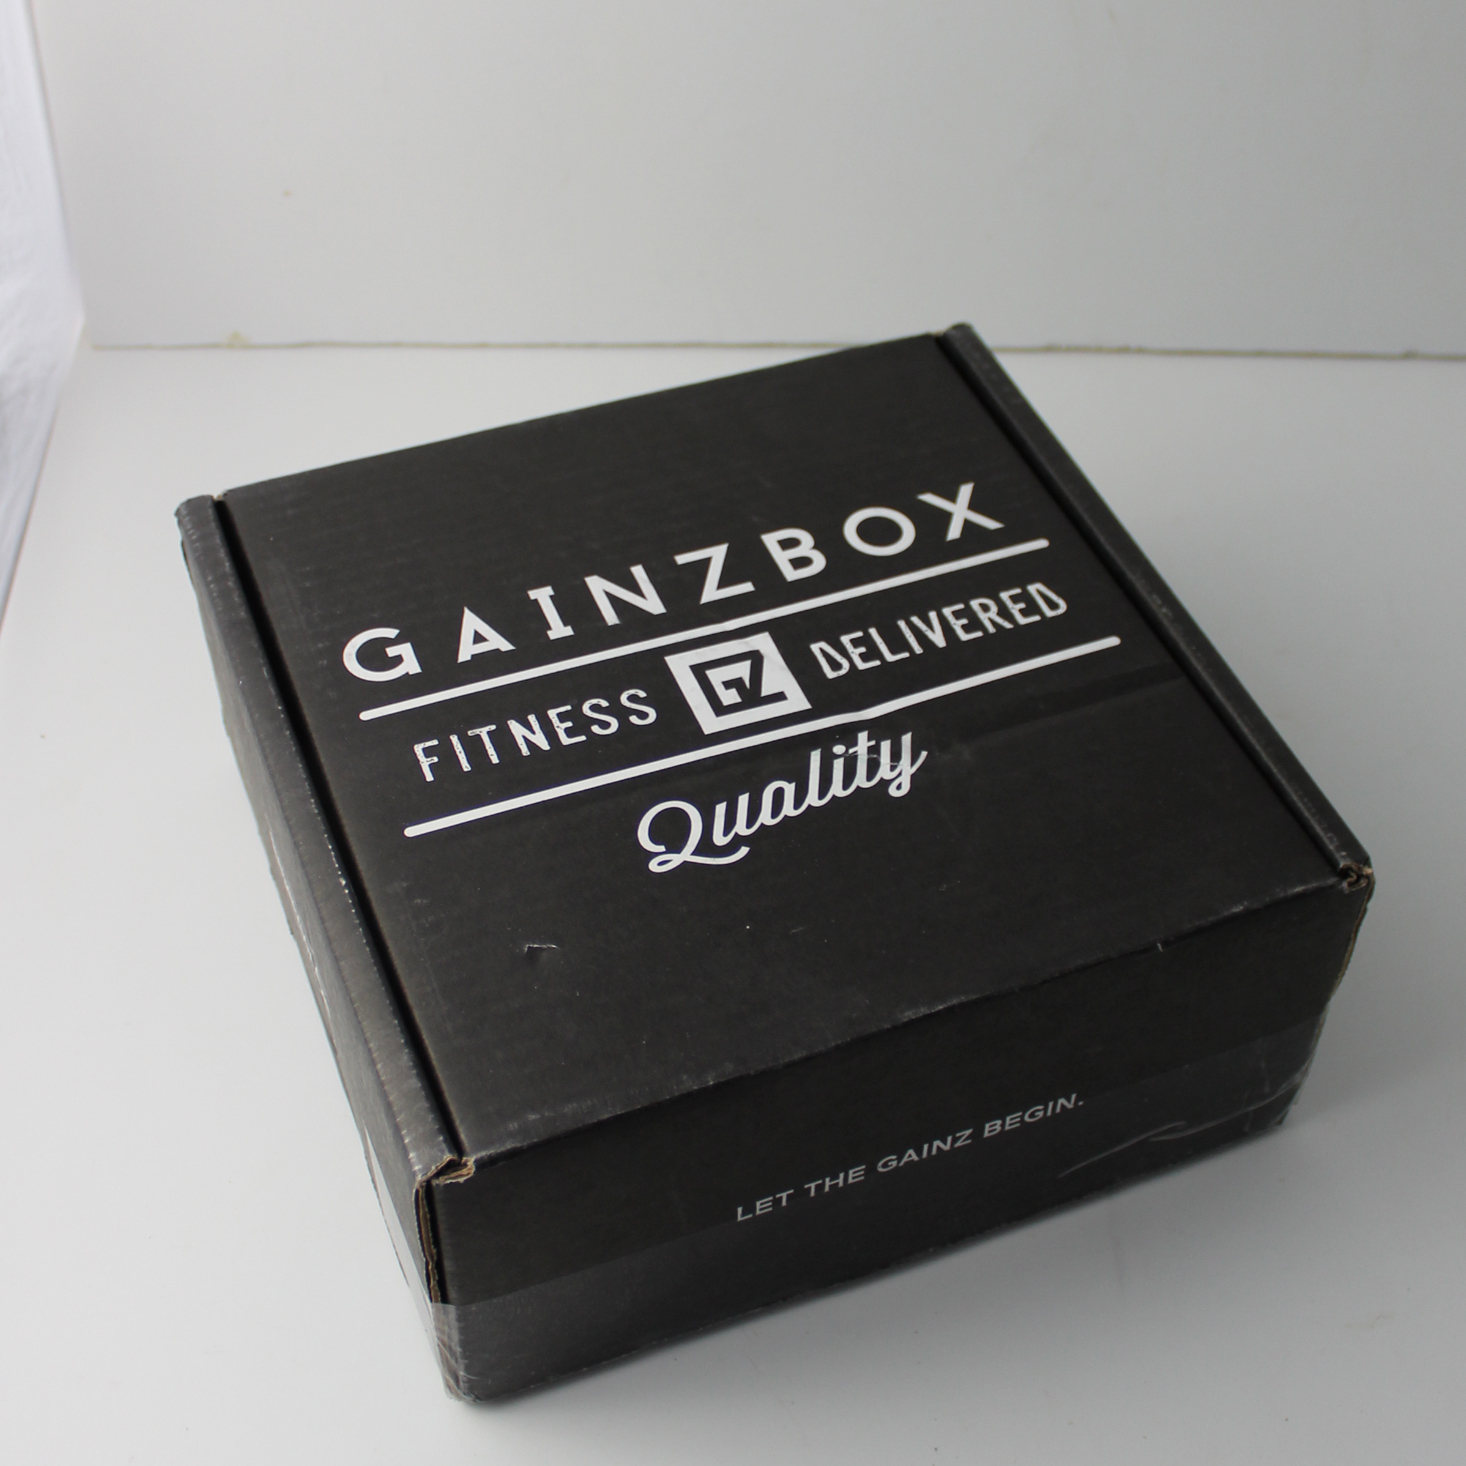 Gainz Box Fitness Subscription Review – January 2019